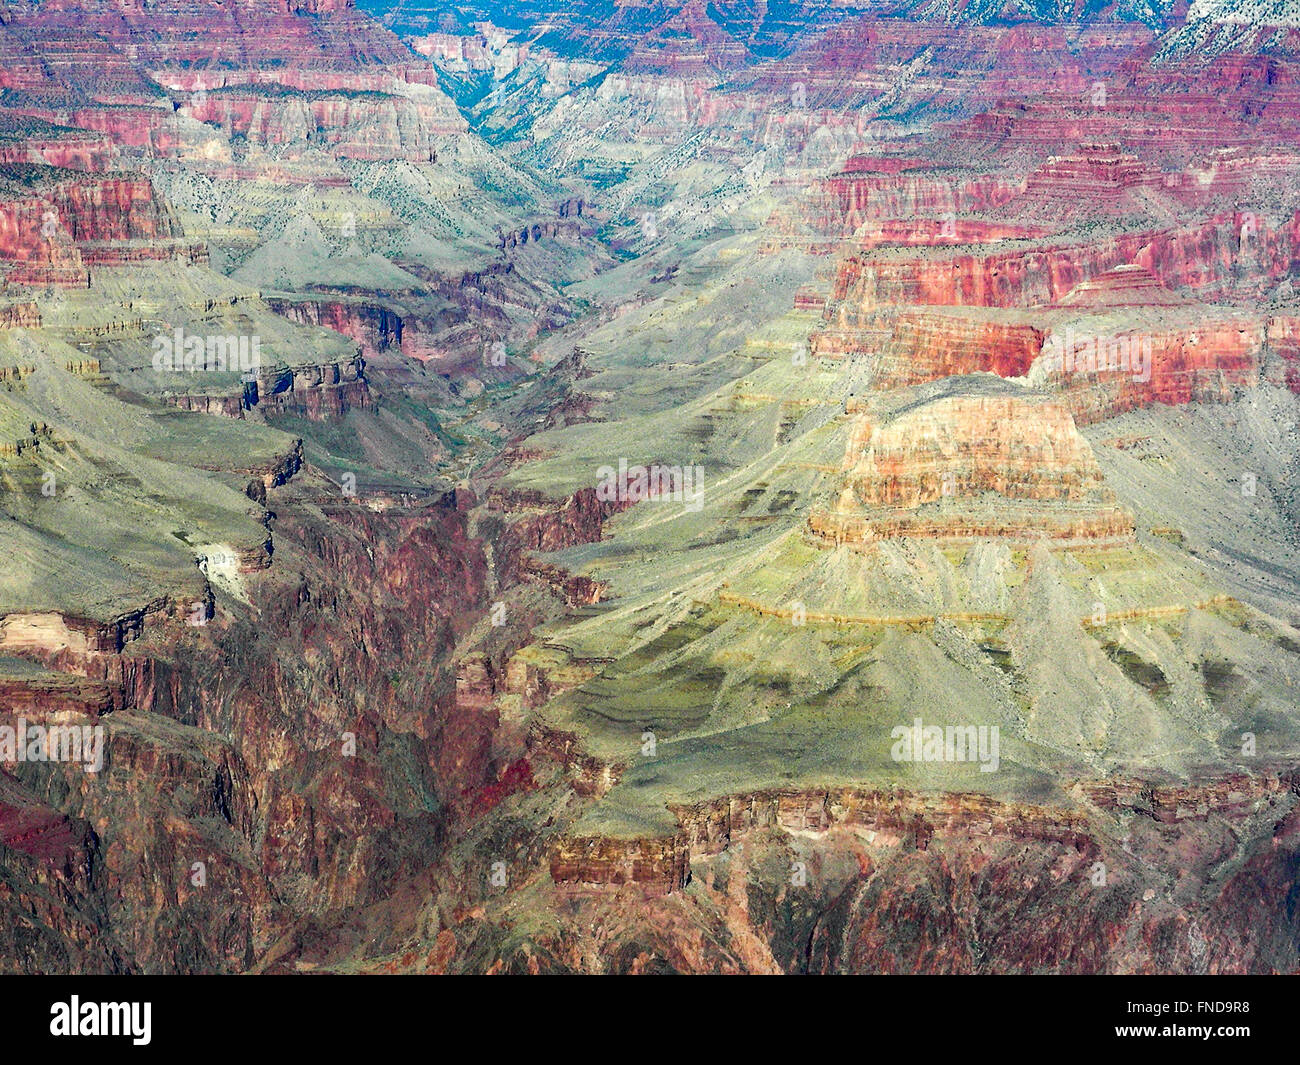 Aerial view of the Grand Canyon, colorful mountains with gorge cutting through the middle. Stock Photo